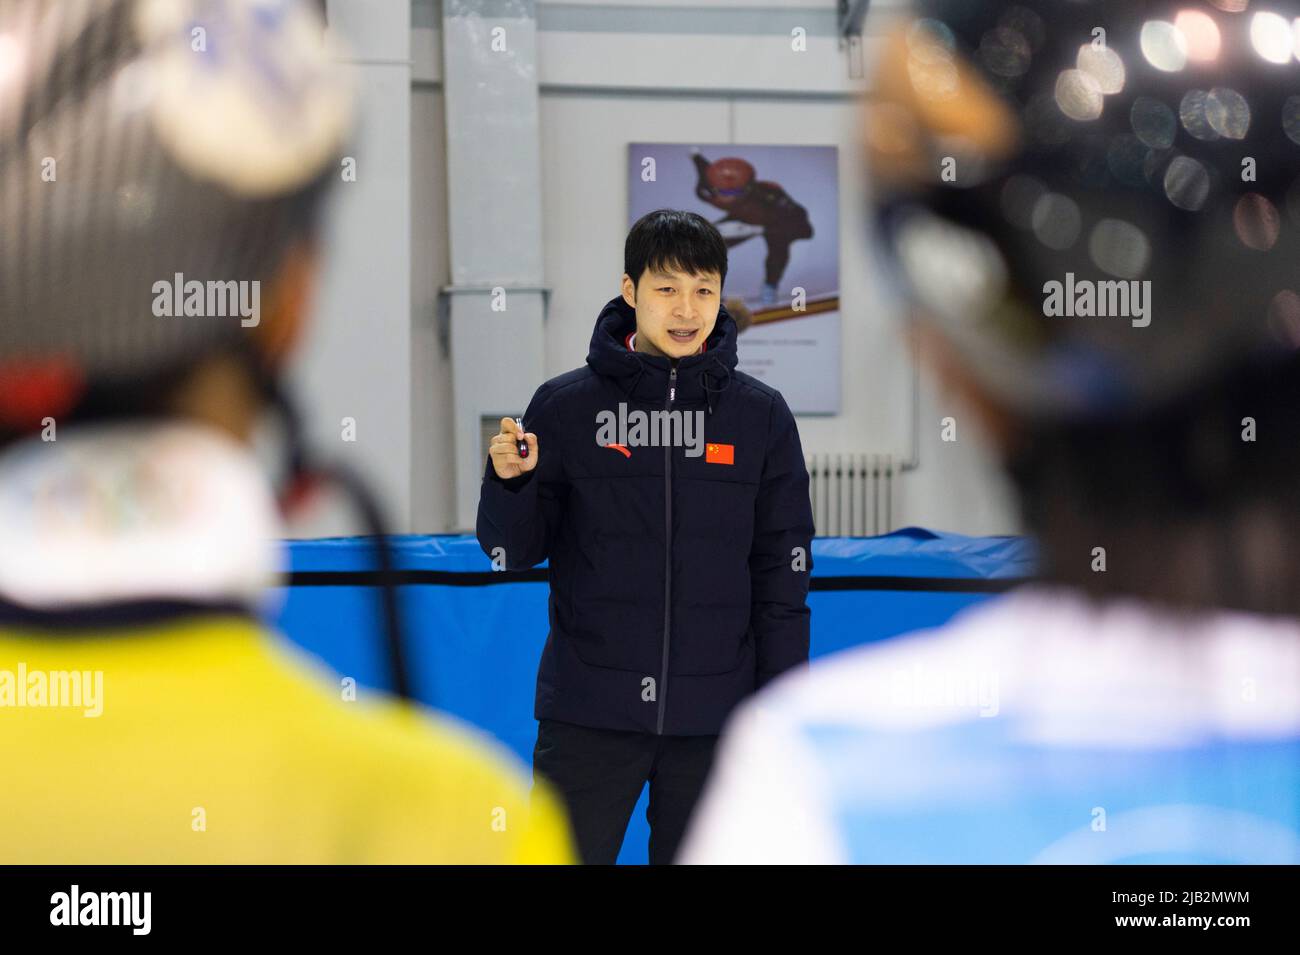 (220602) -- QITAIHE, June 2, 2022 (Xinhua) -- Zhang Lizeng, coach of Qitaihe Juvenile's Short-Track Speed Skating Amateur Sports School guides young athletes during a training session at Qitaihe Sports Center in Qitaihe City, northeast China's Heilongjiang Province, May 30, 2022. Qitaihe City in Heilongjiang Province, famed for its short-track speed skating talents, has trained 10 world champions including Yang Yang, Wang Meng and Fan Kexin. Generations of coachs in the city have endeavored to discover and train young talents for short-track speed skating. (Xinhua/Xie Jianfei) Stock Photo